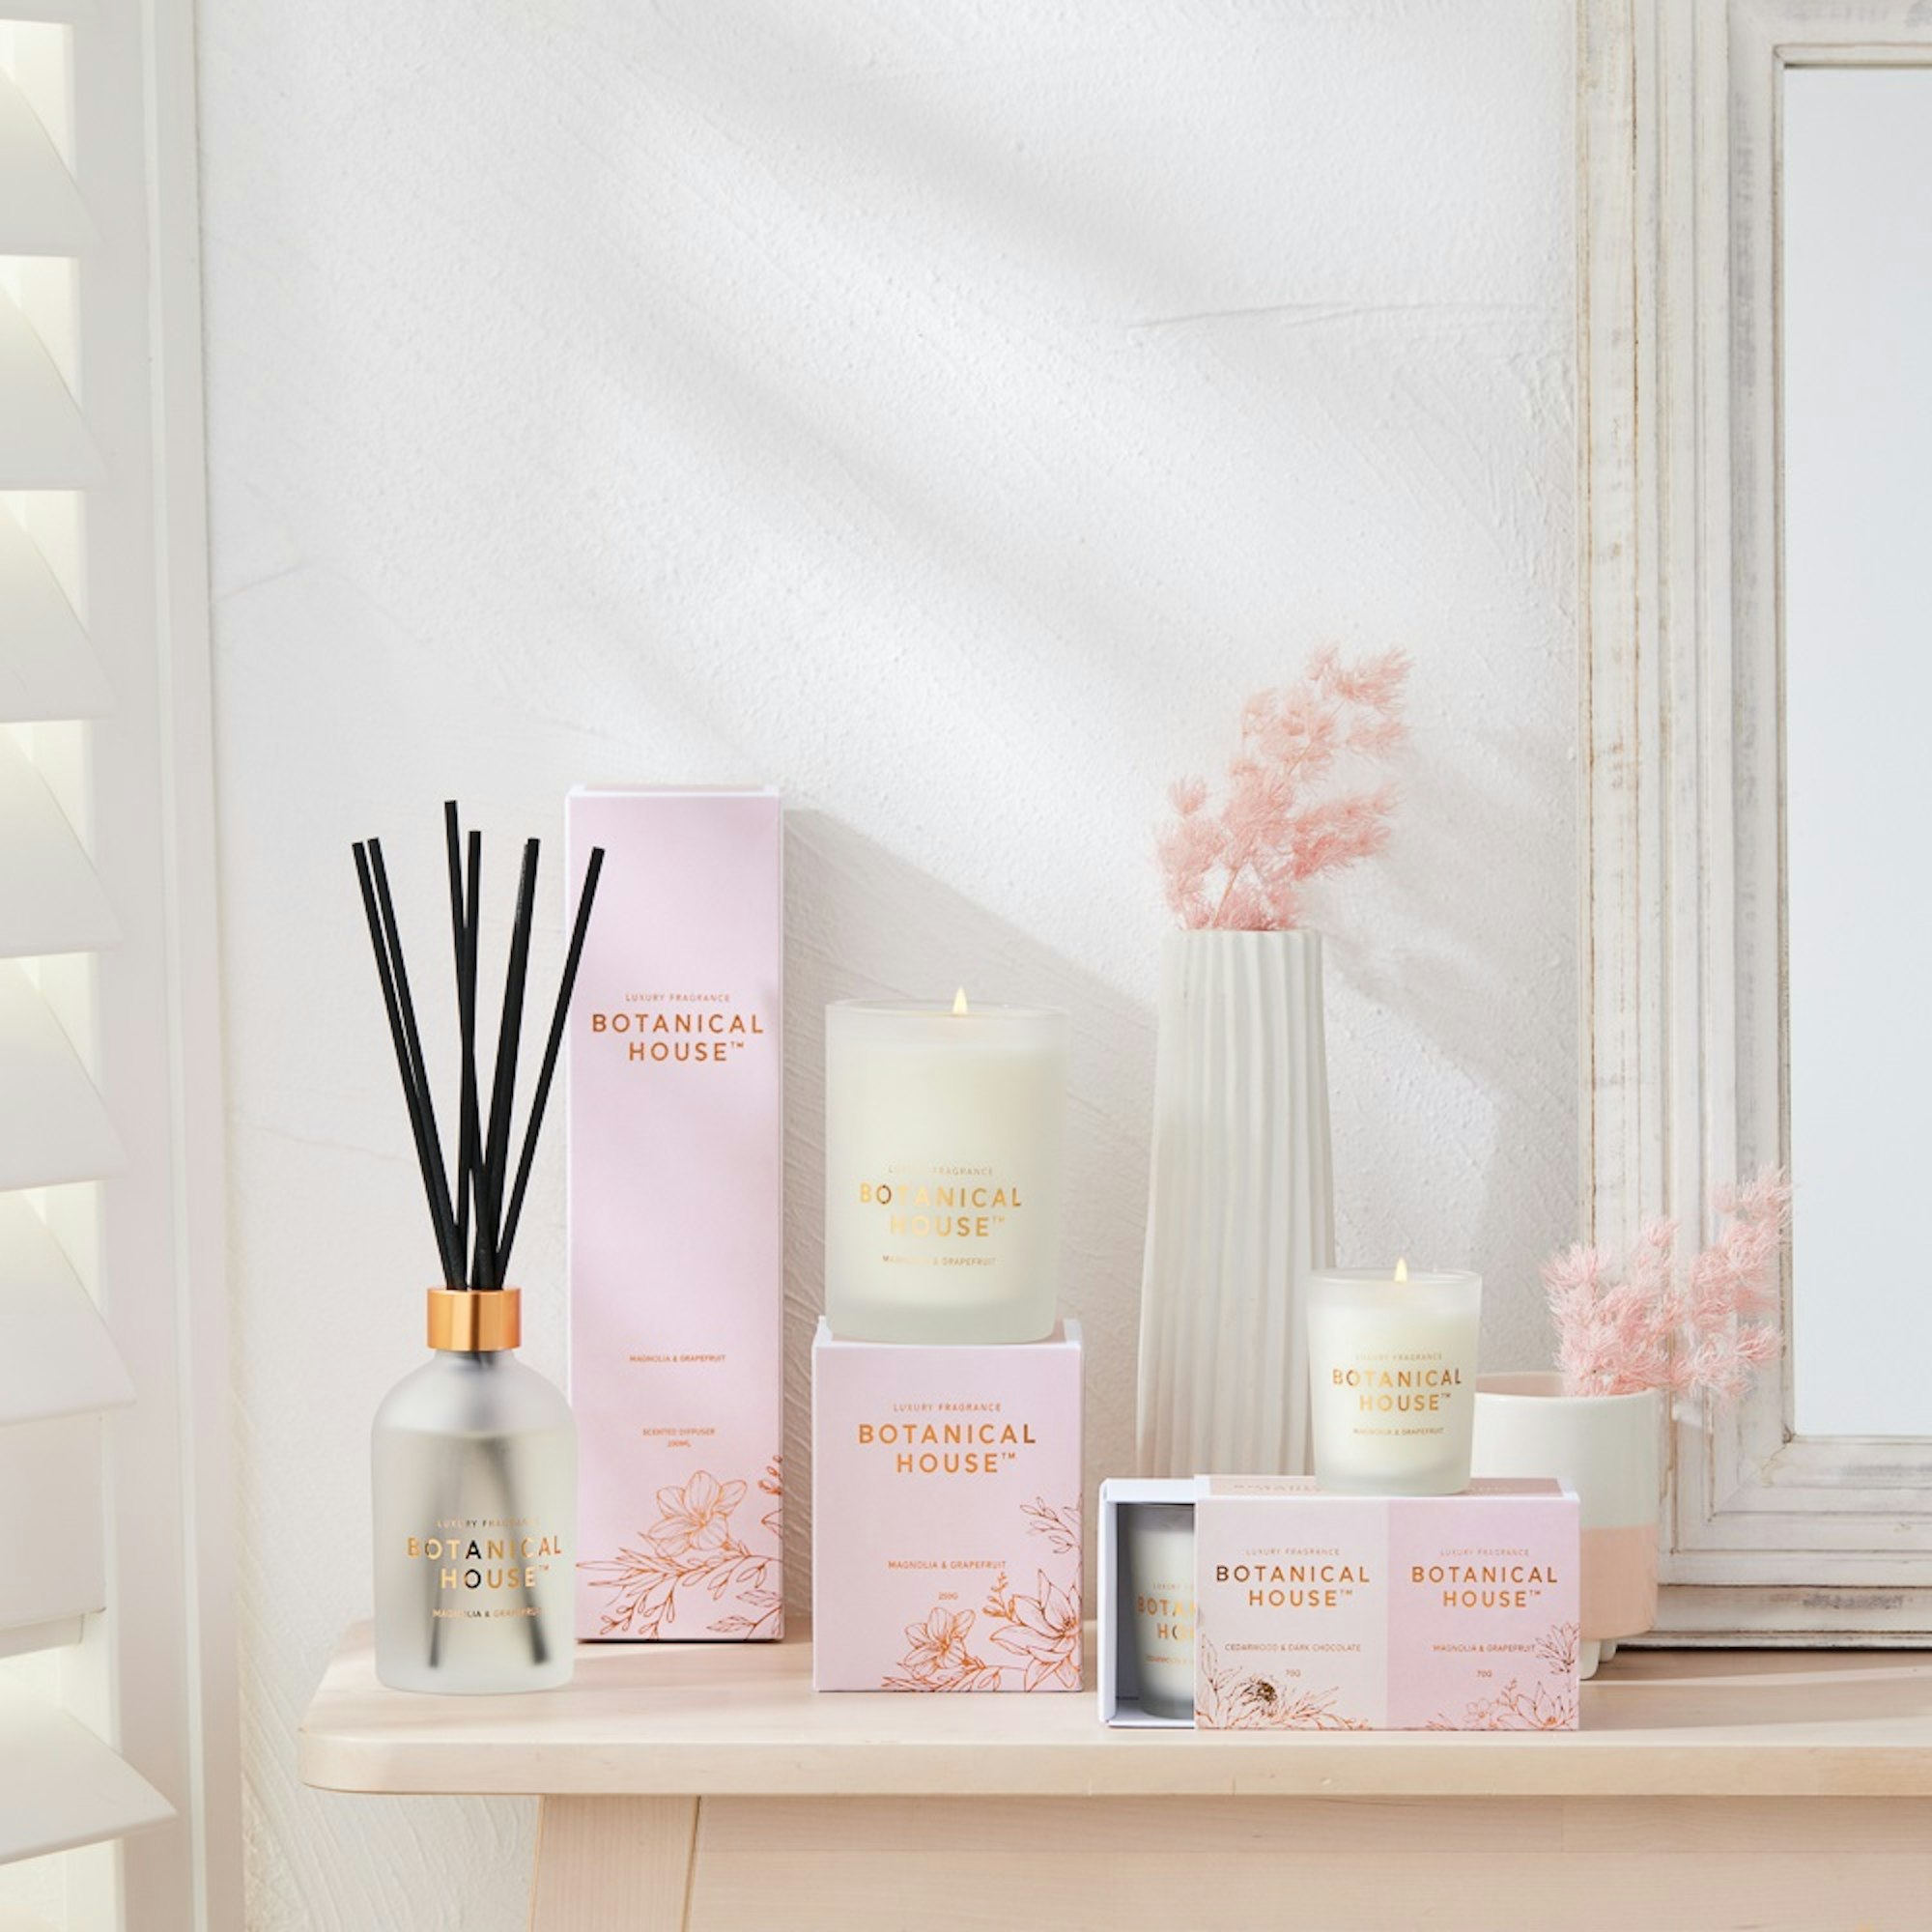 Botanical House scented candle and reed diffuser with pink packaging